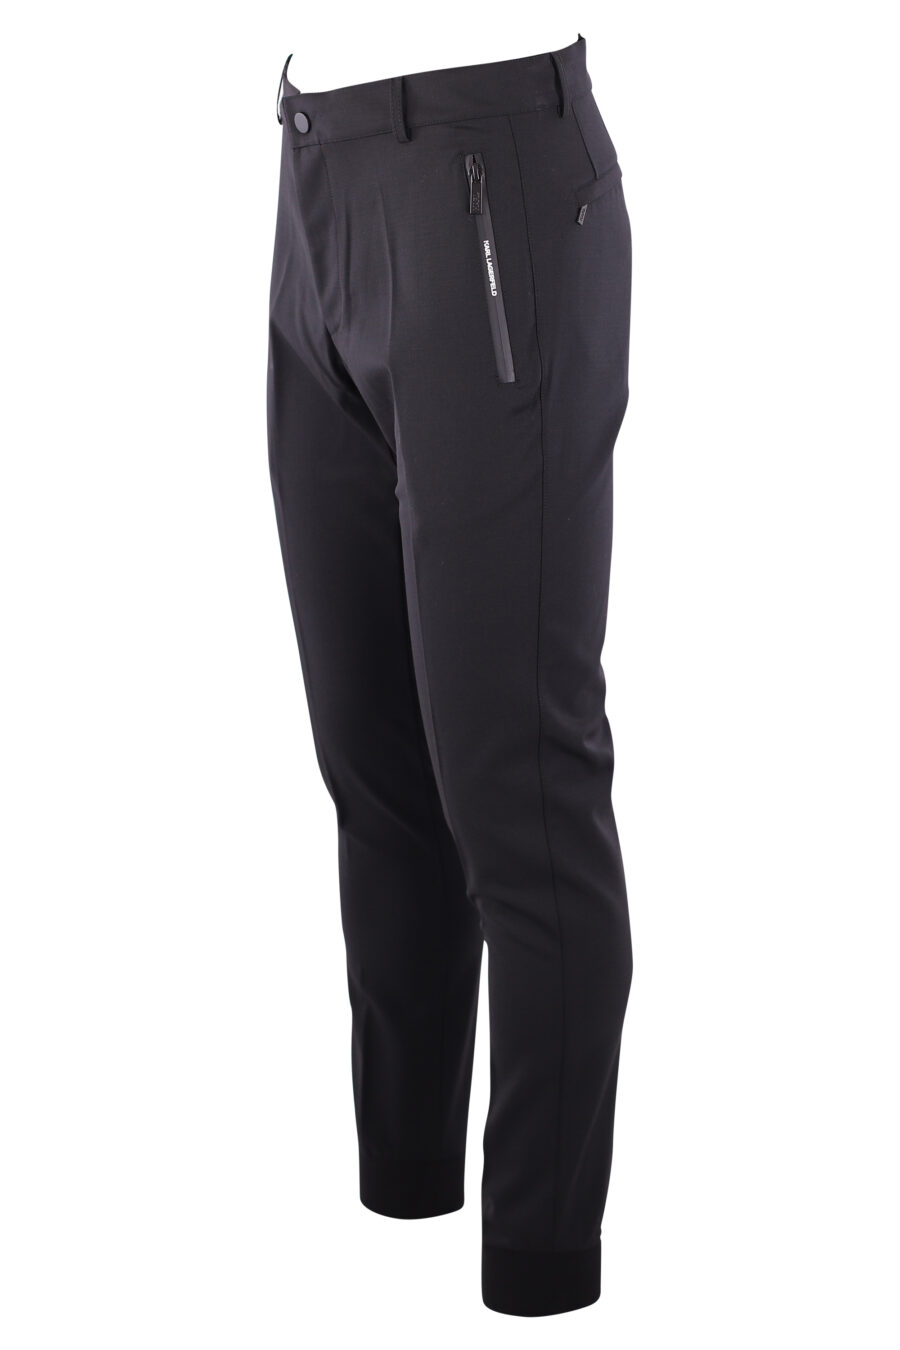 Black trousers with logo on zip - IMG 3233